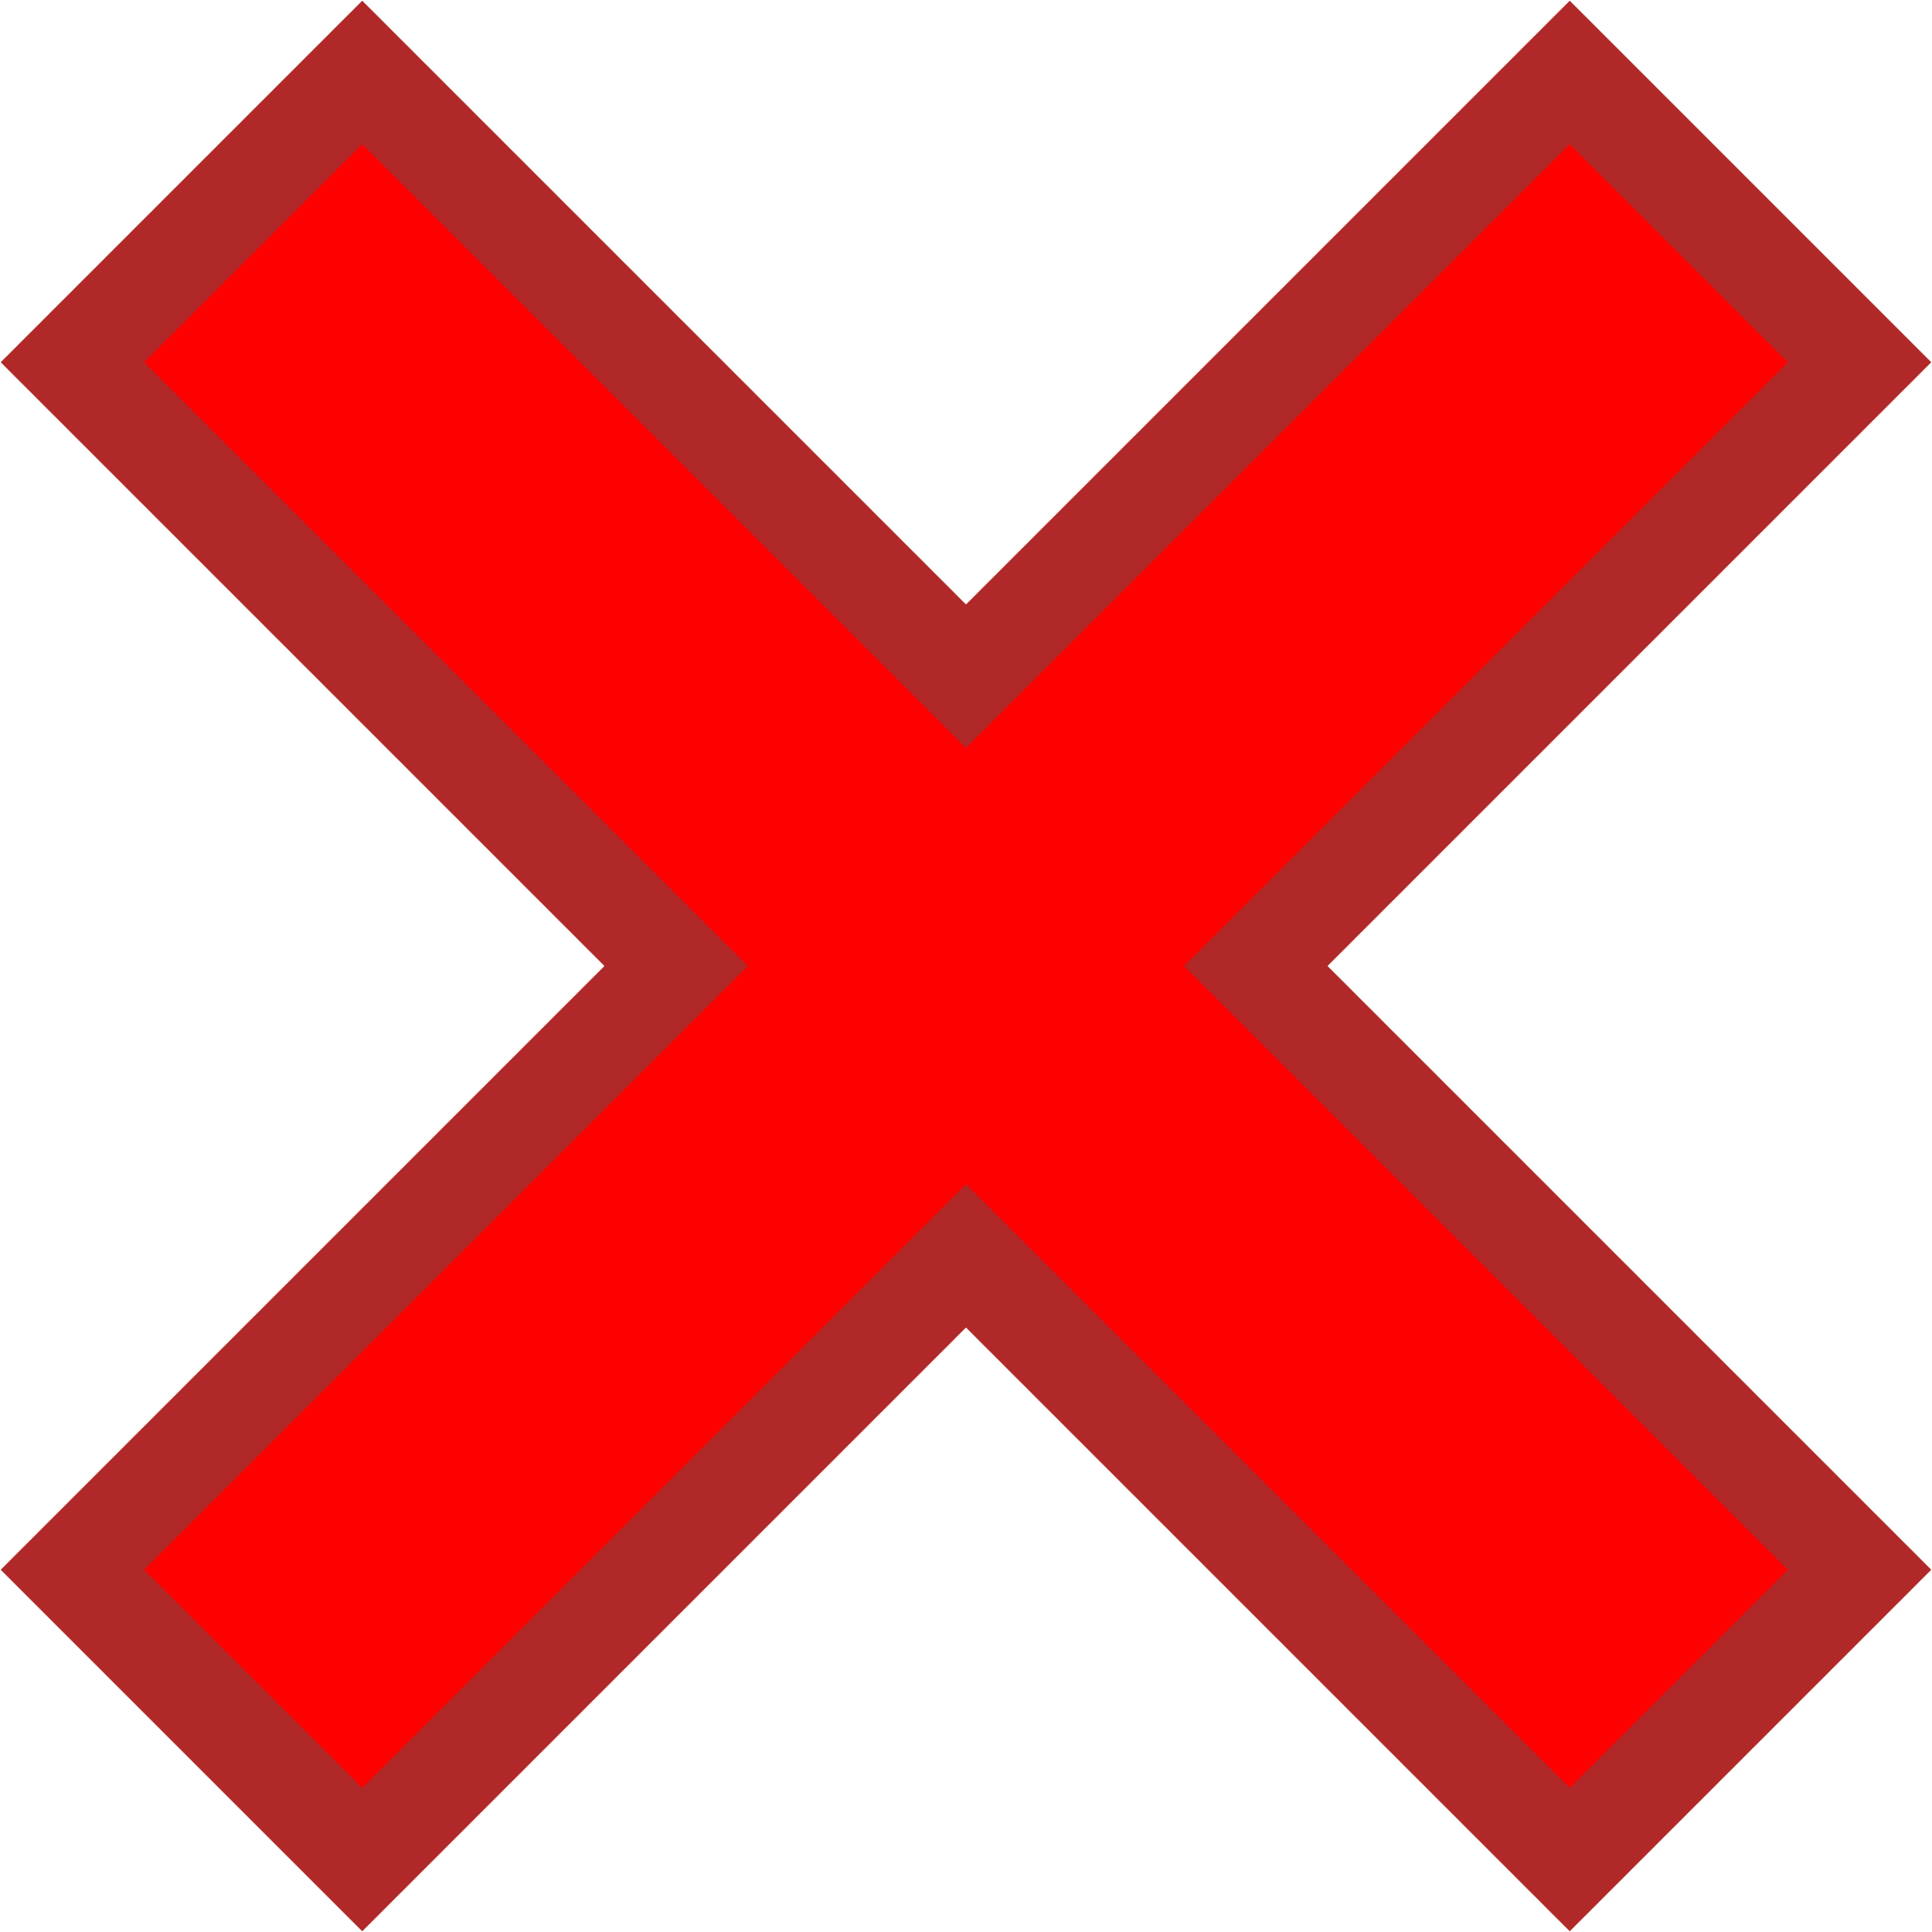 Red X Image.png